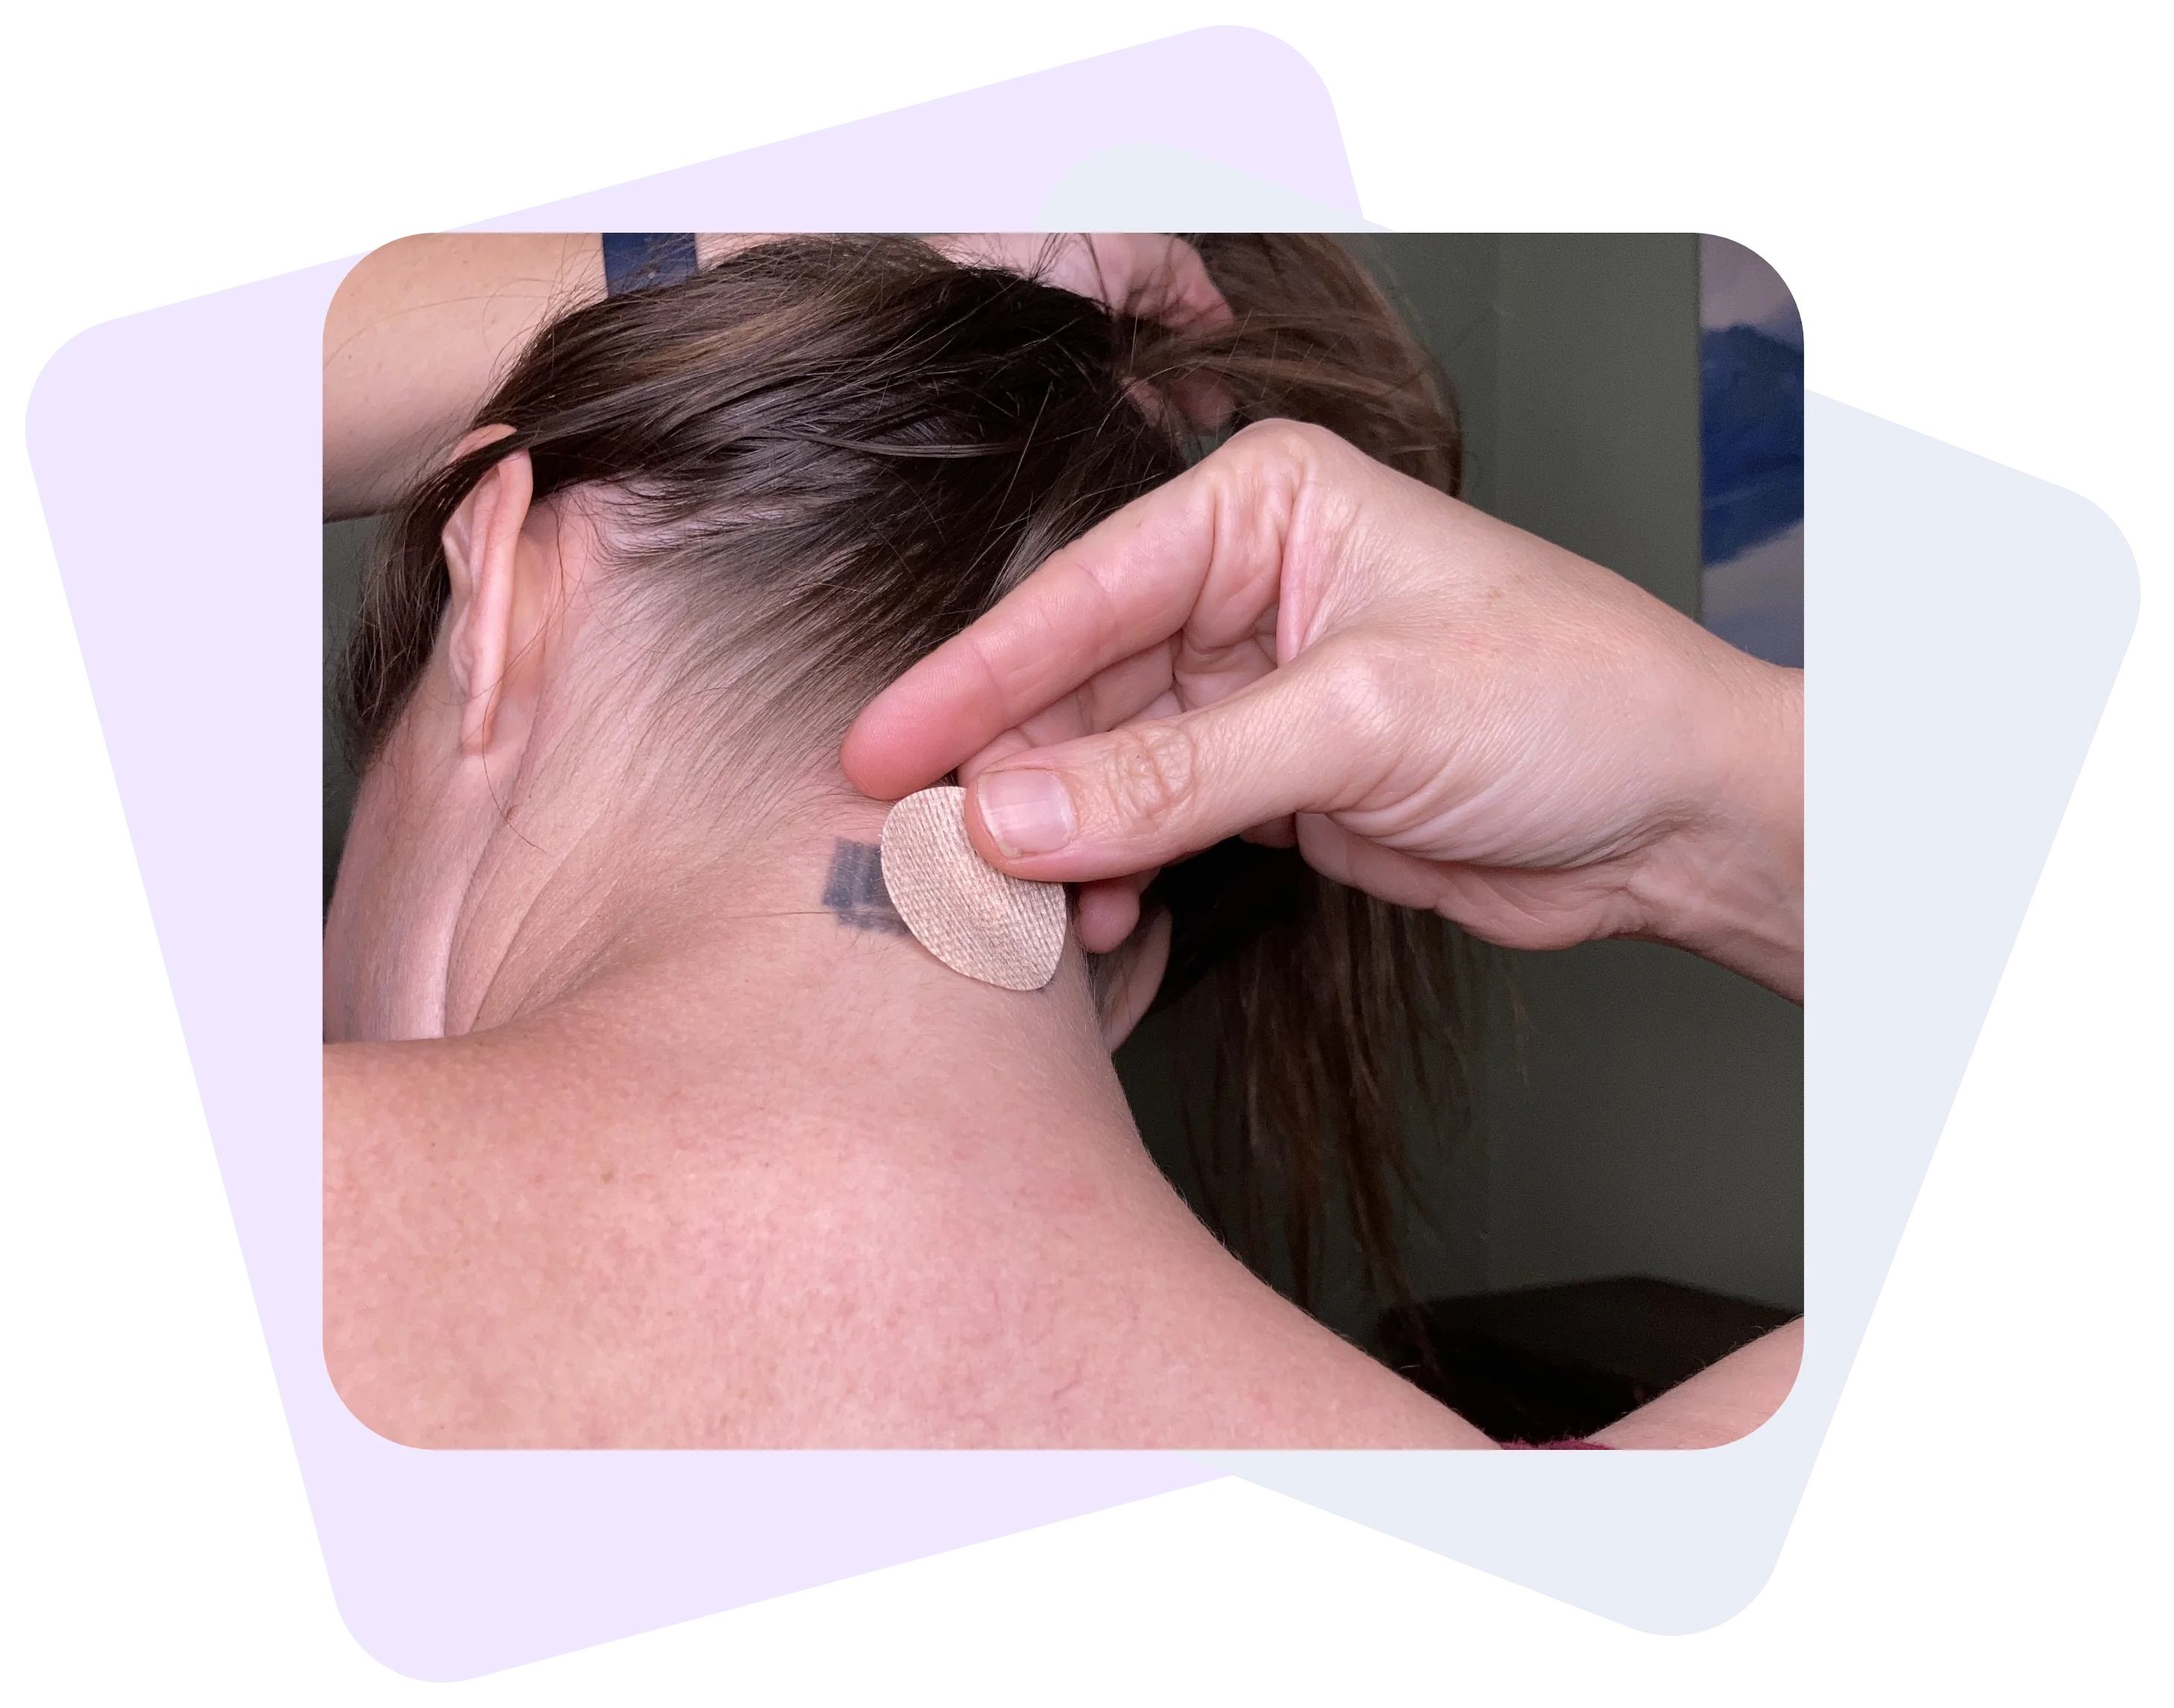 A woman facing backwards with her head slightly tilted down is holding her hair as she tries to put a Restore patch on her nape, covering her tattoo.